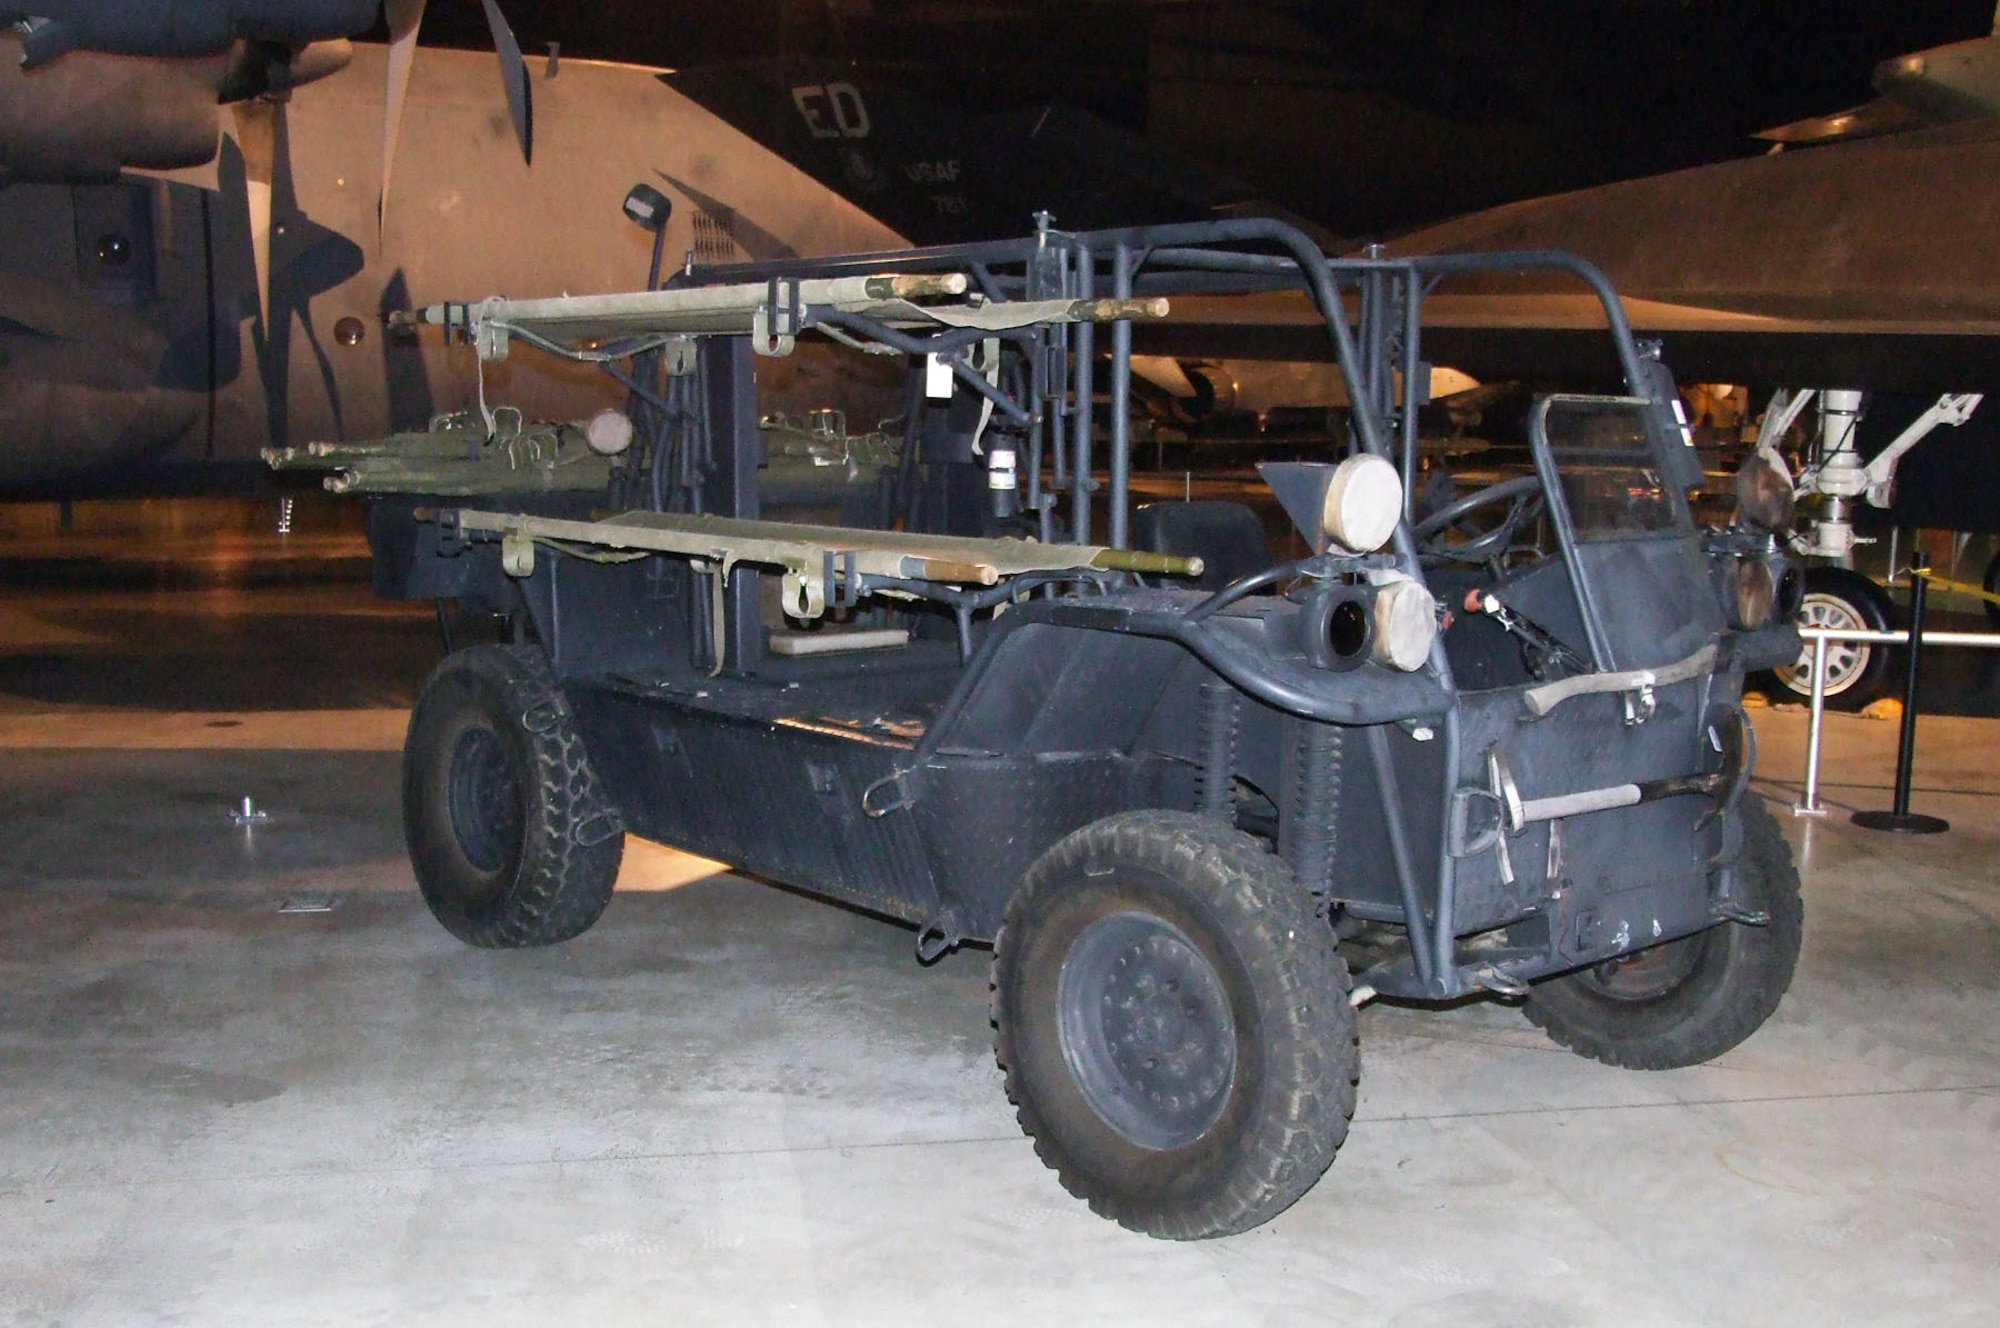 The Rescue All Terrain Transport (RATT) is a high-mobility vehicle used by Air Force special operations to transport and treat casualties in the field, for airfield seizures and as a field utility vehicle. (U.S. Air Force photo)